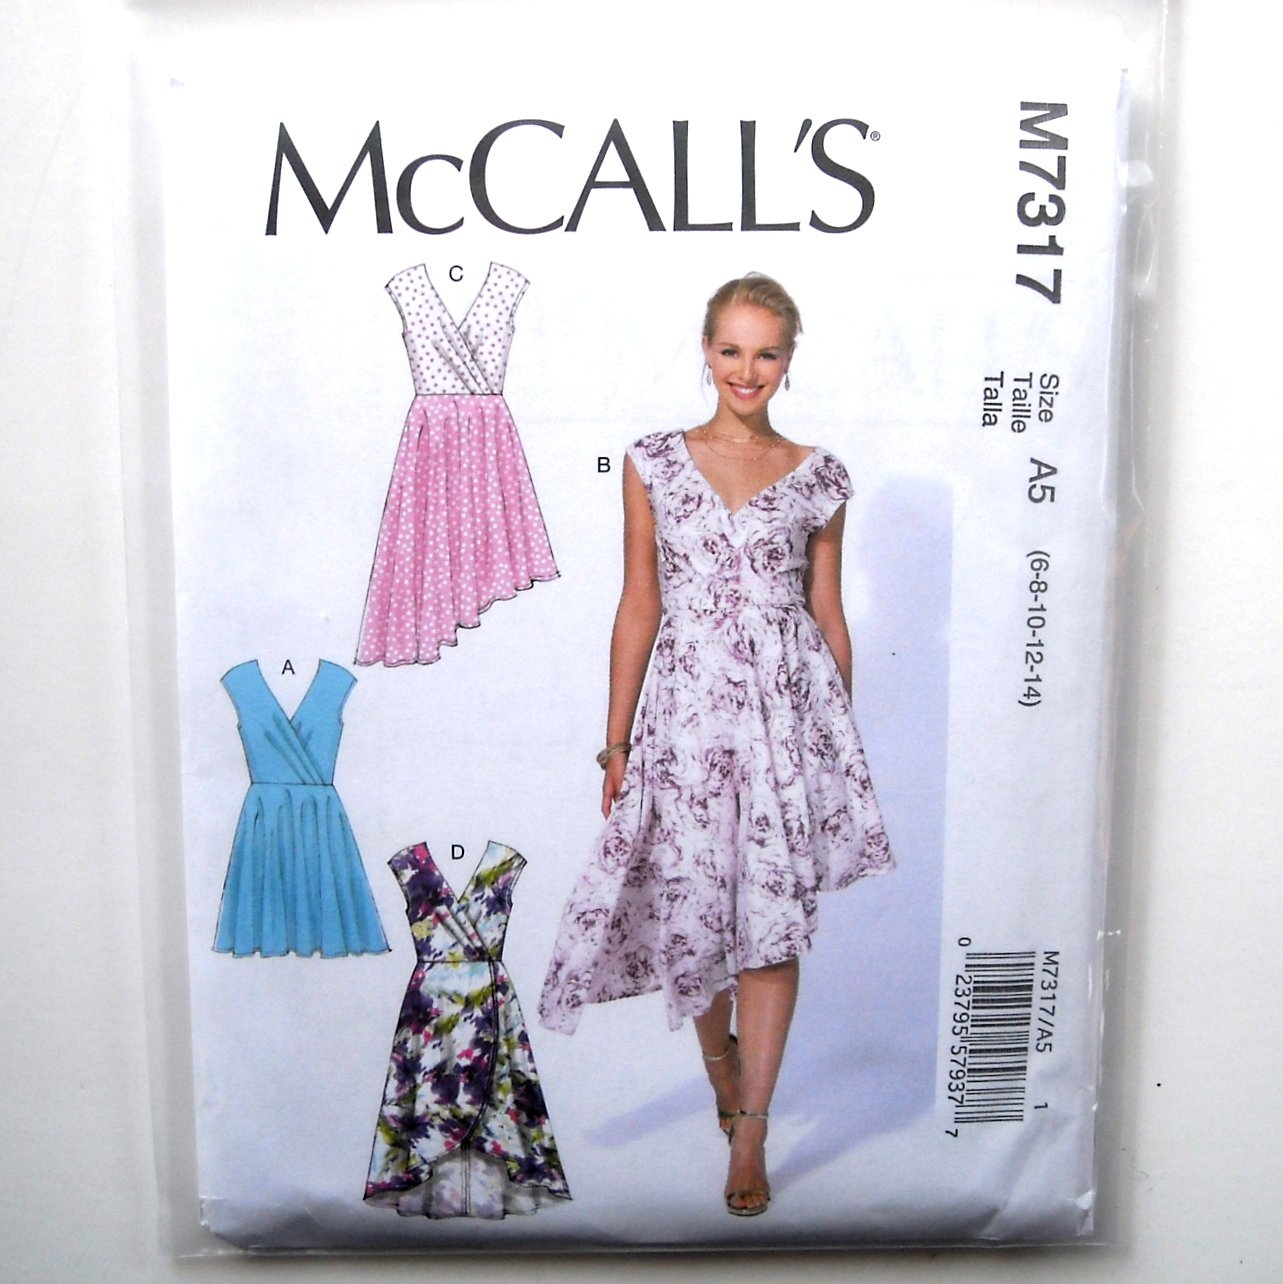 Sewing Patterns, McCall's, Women's / Misses Patterns, Sewing Patt...